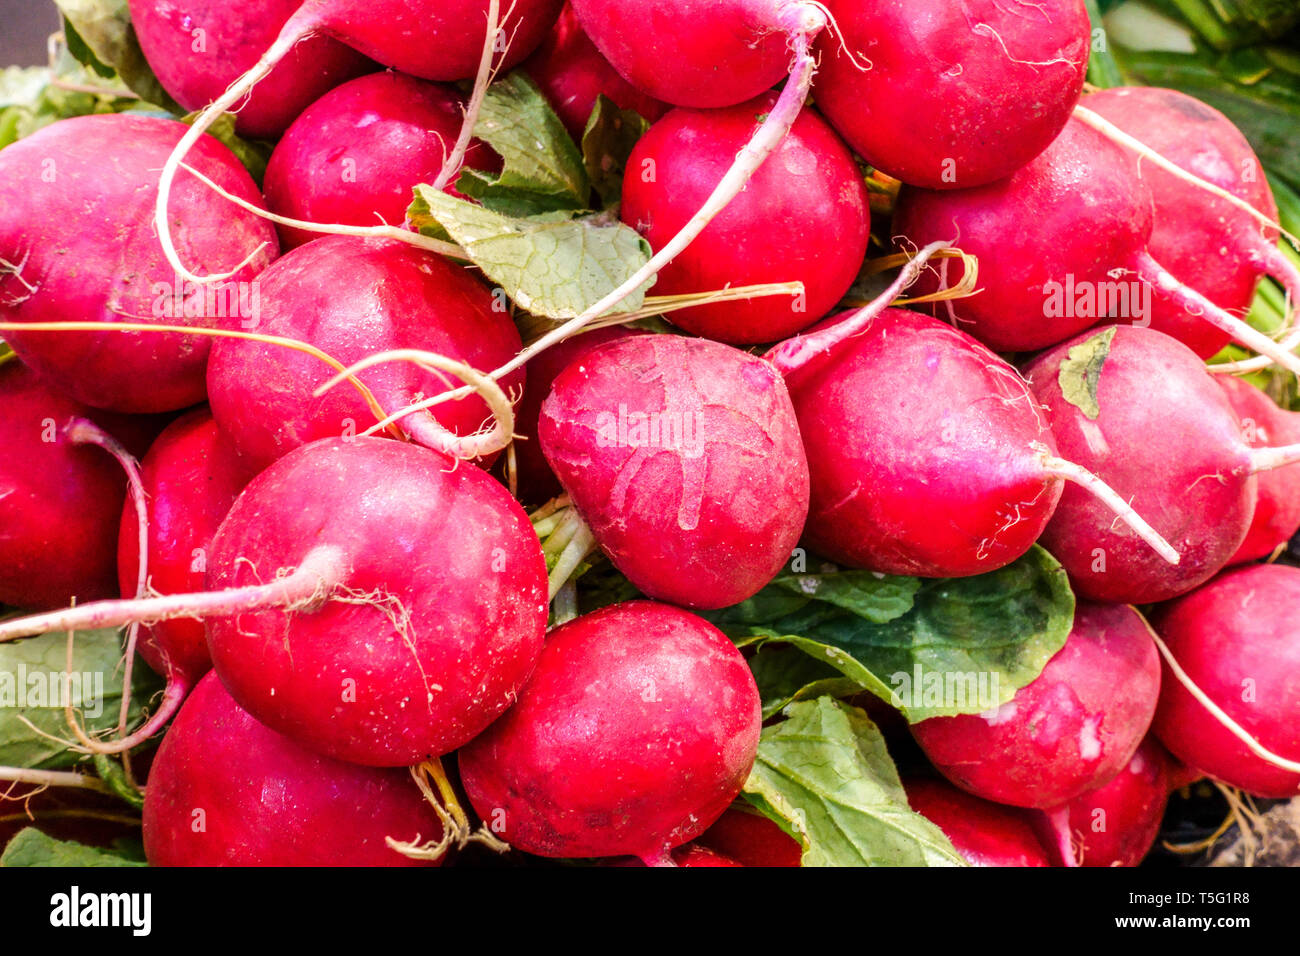 Bunch of red radishes on the market, Spain Stock Photo